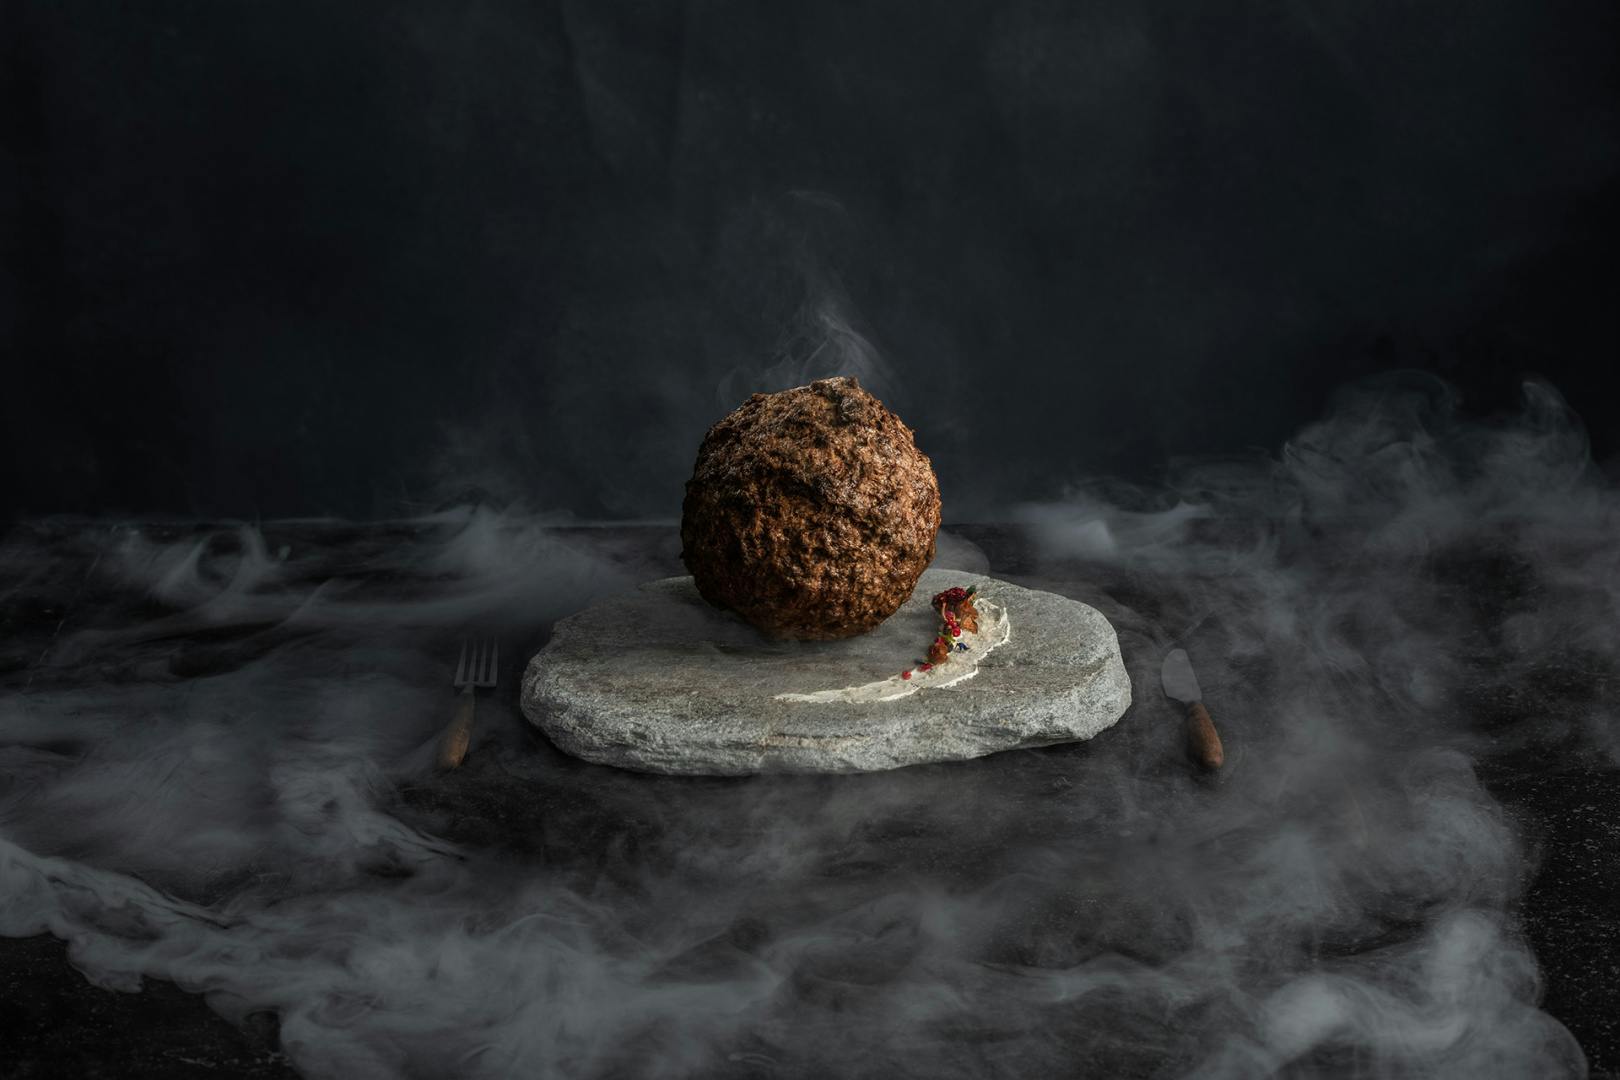 Image of the mammoth meatball shown on a stone serving plate surrounded by smoke